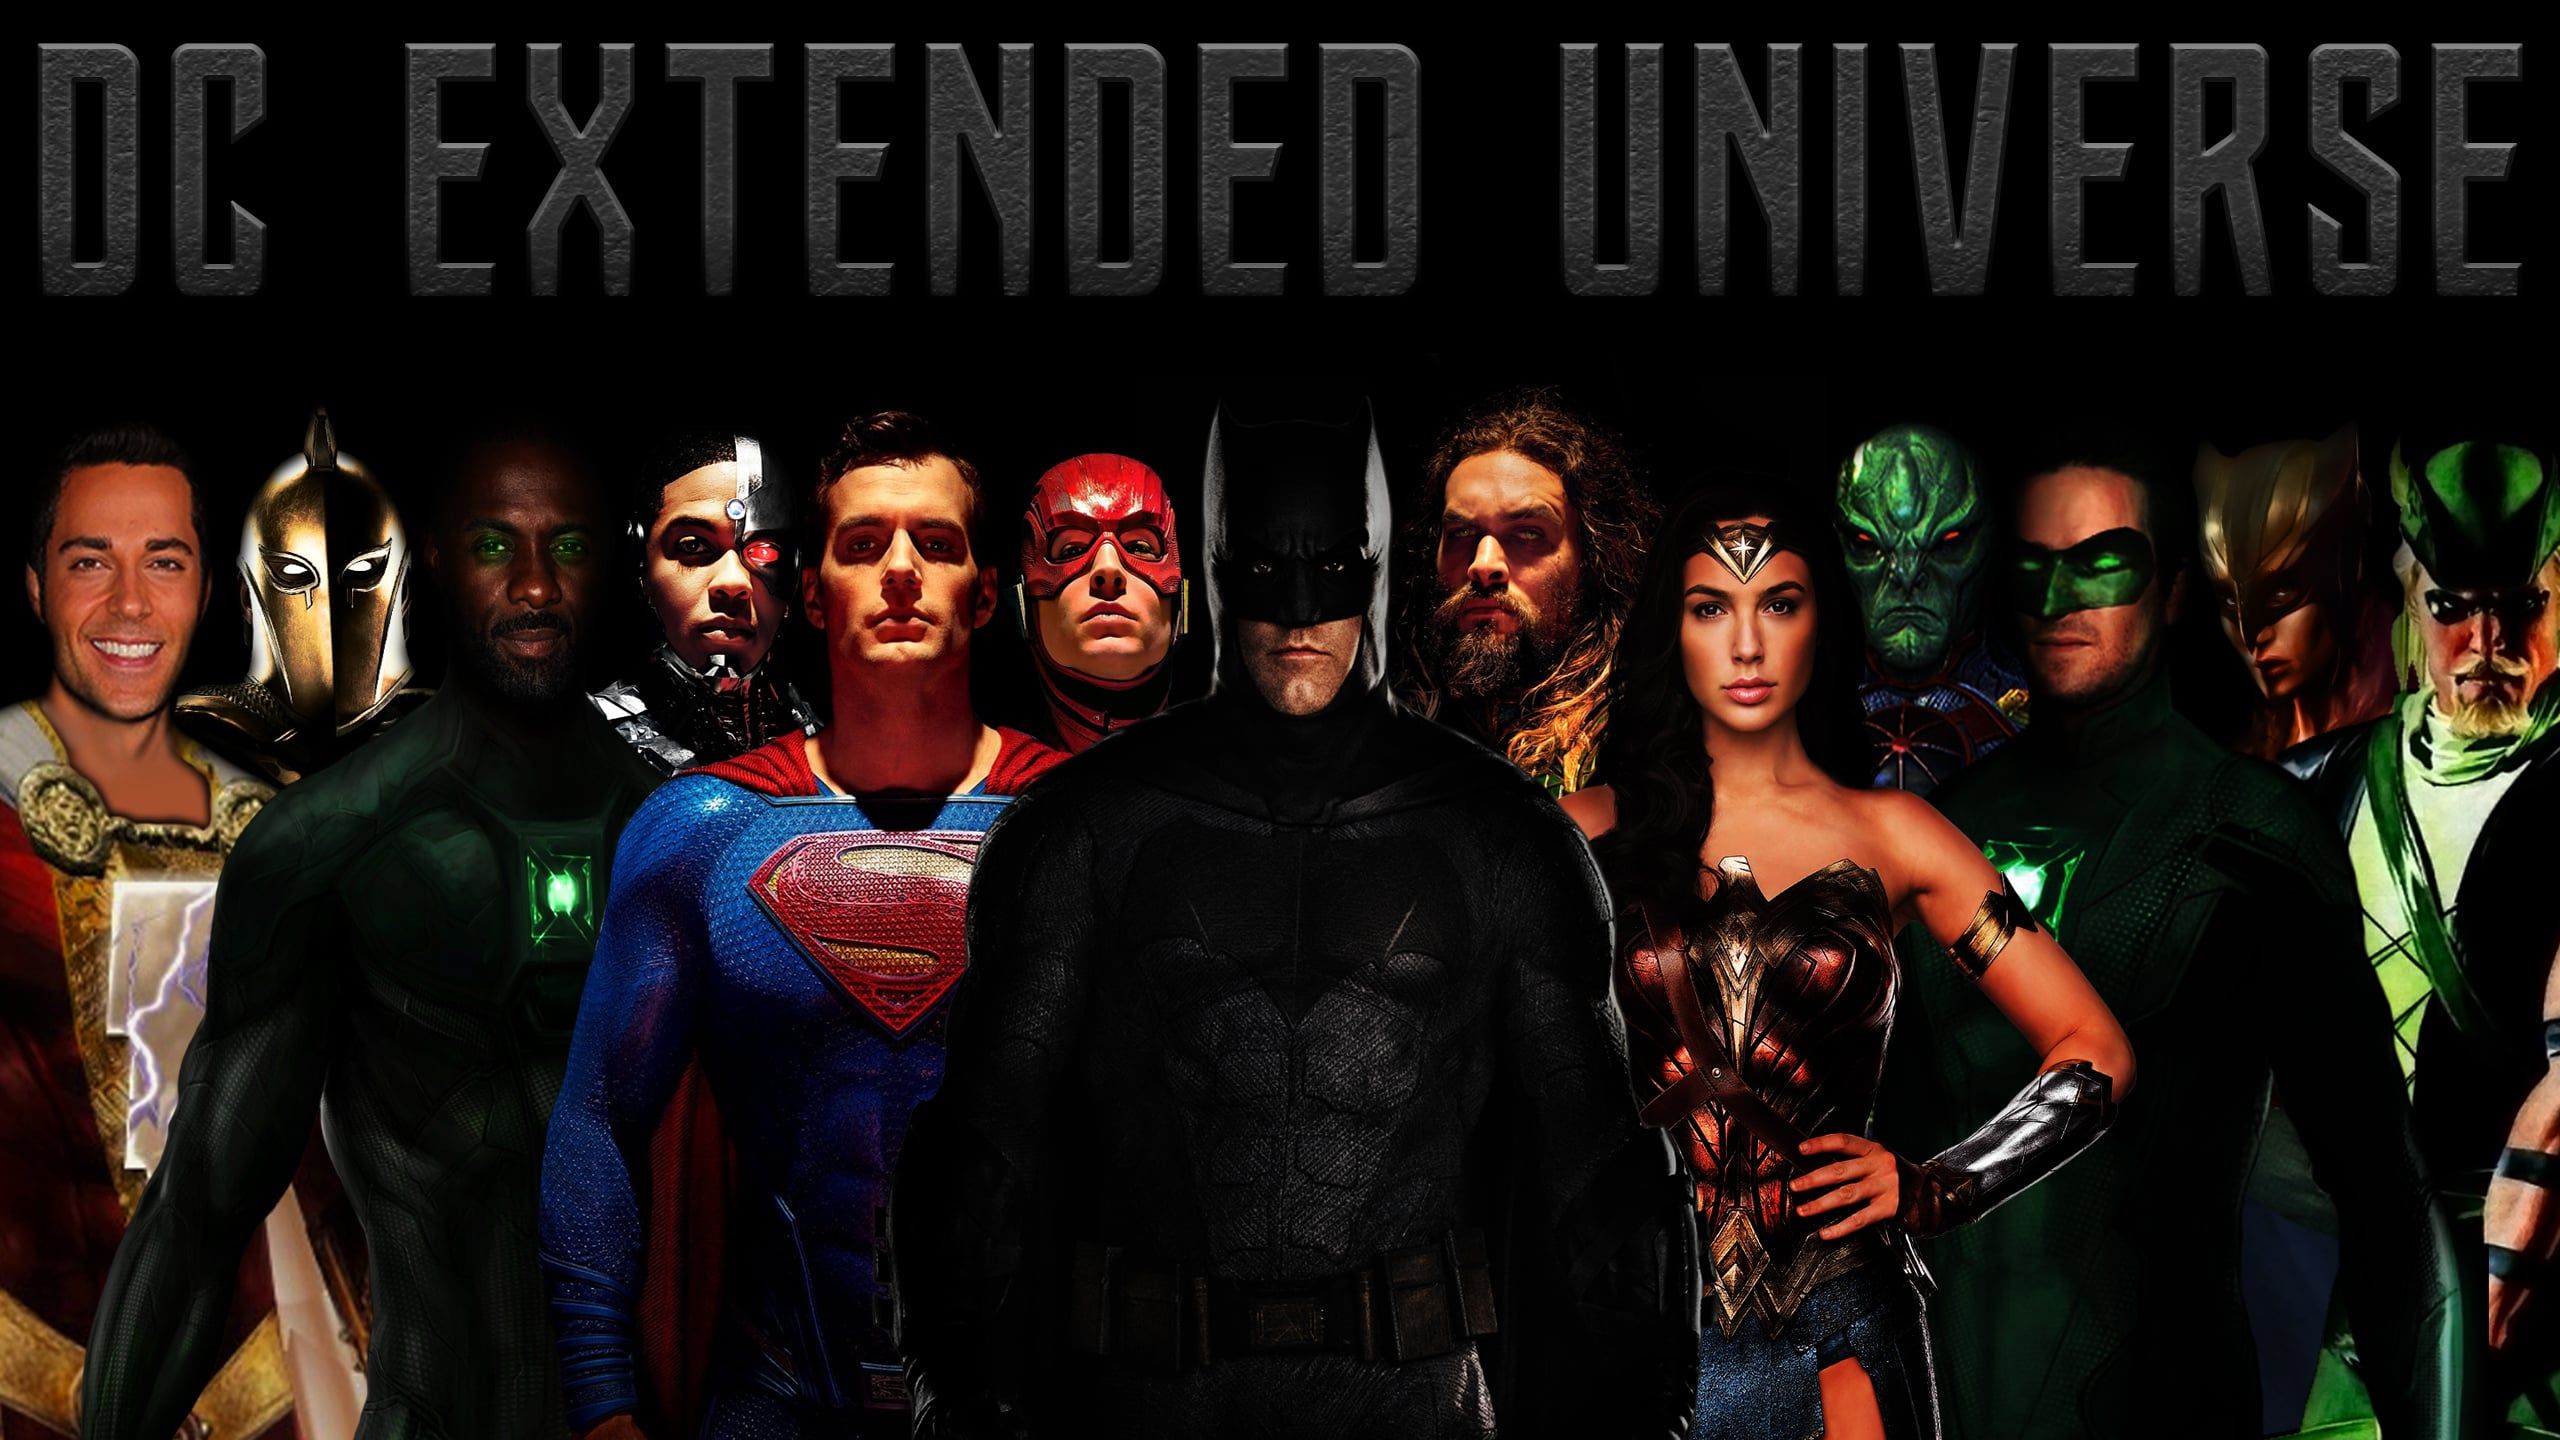 DC Extended Universe Characters Wallpapers - Wallpaper Cave